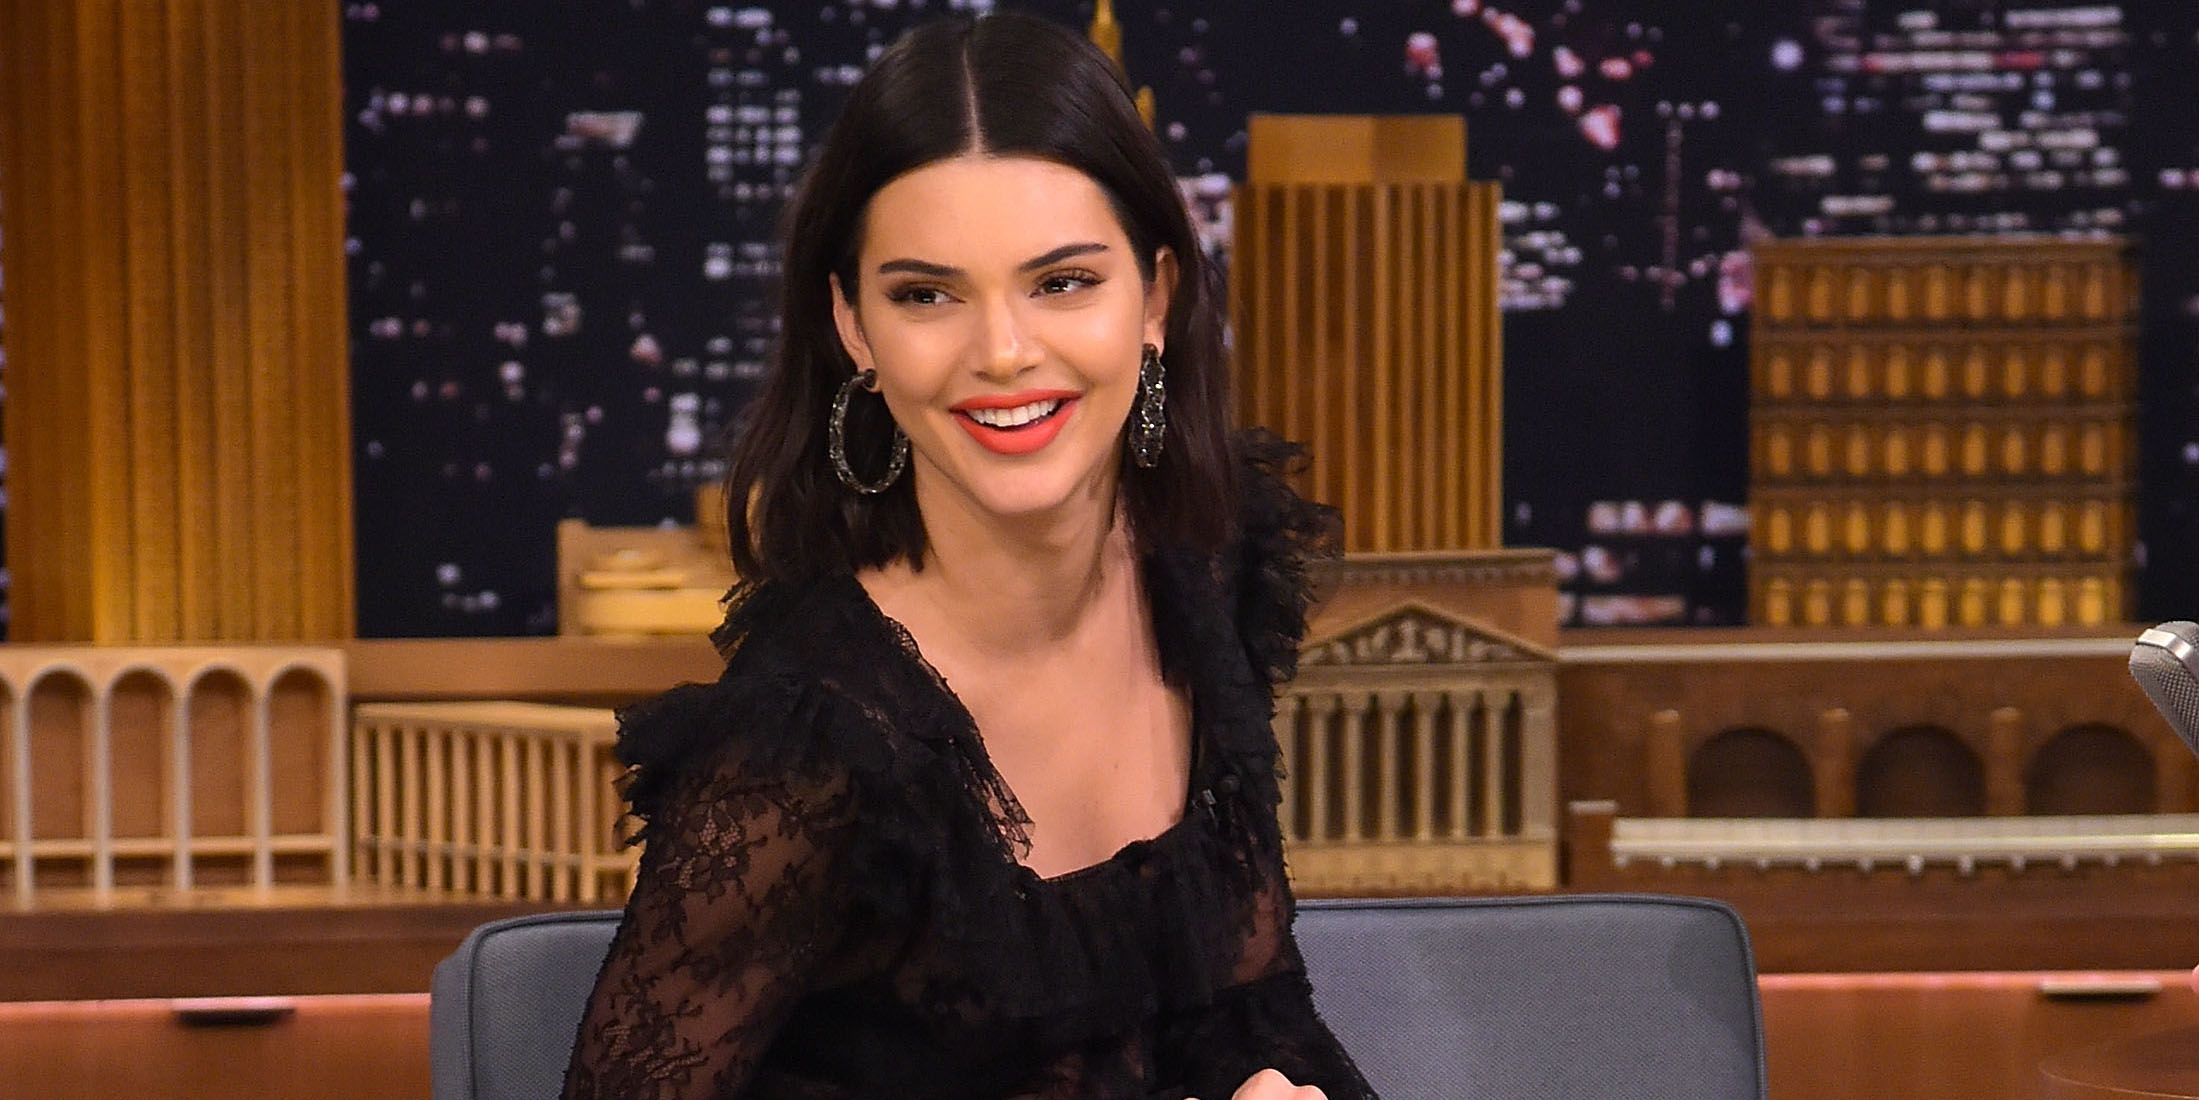 Watch Kendall Jenner Sing About Her Vagina In This